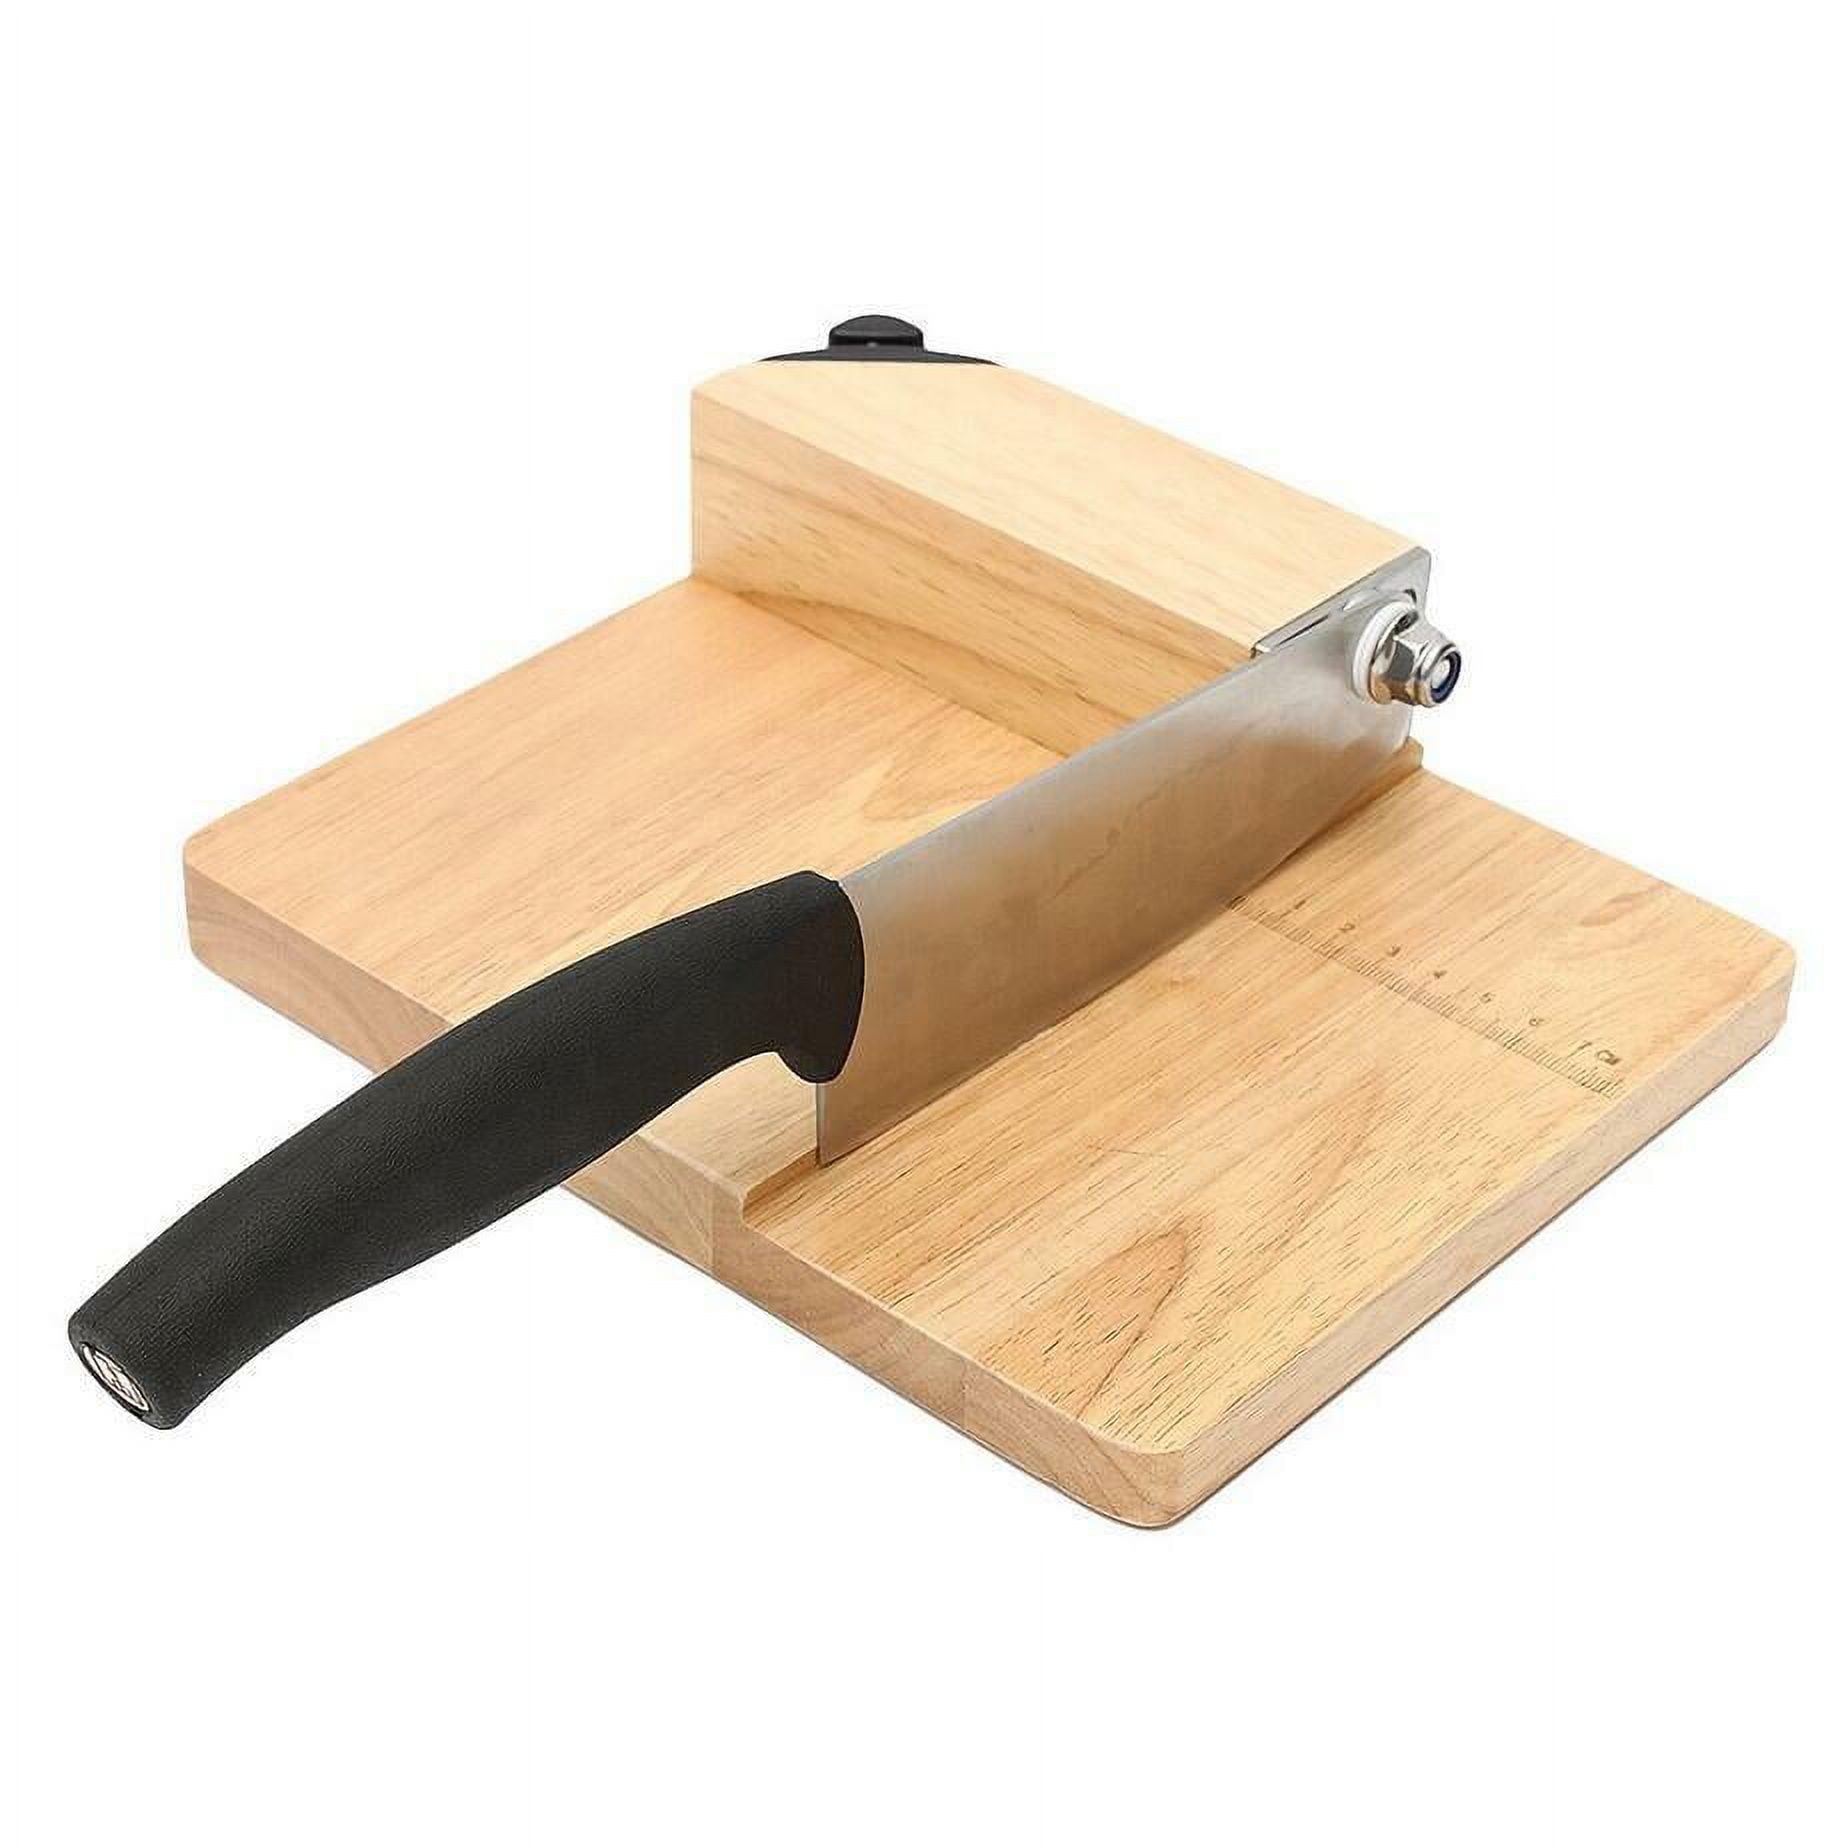 Meat slicer Stainless Steel Jerky Maker Cutting Board With 10-Inch  Professional Slicing and Carving Knife